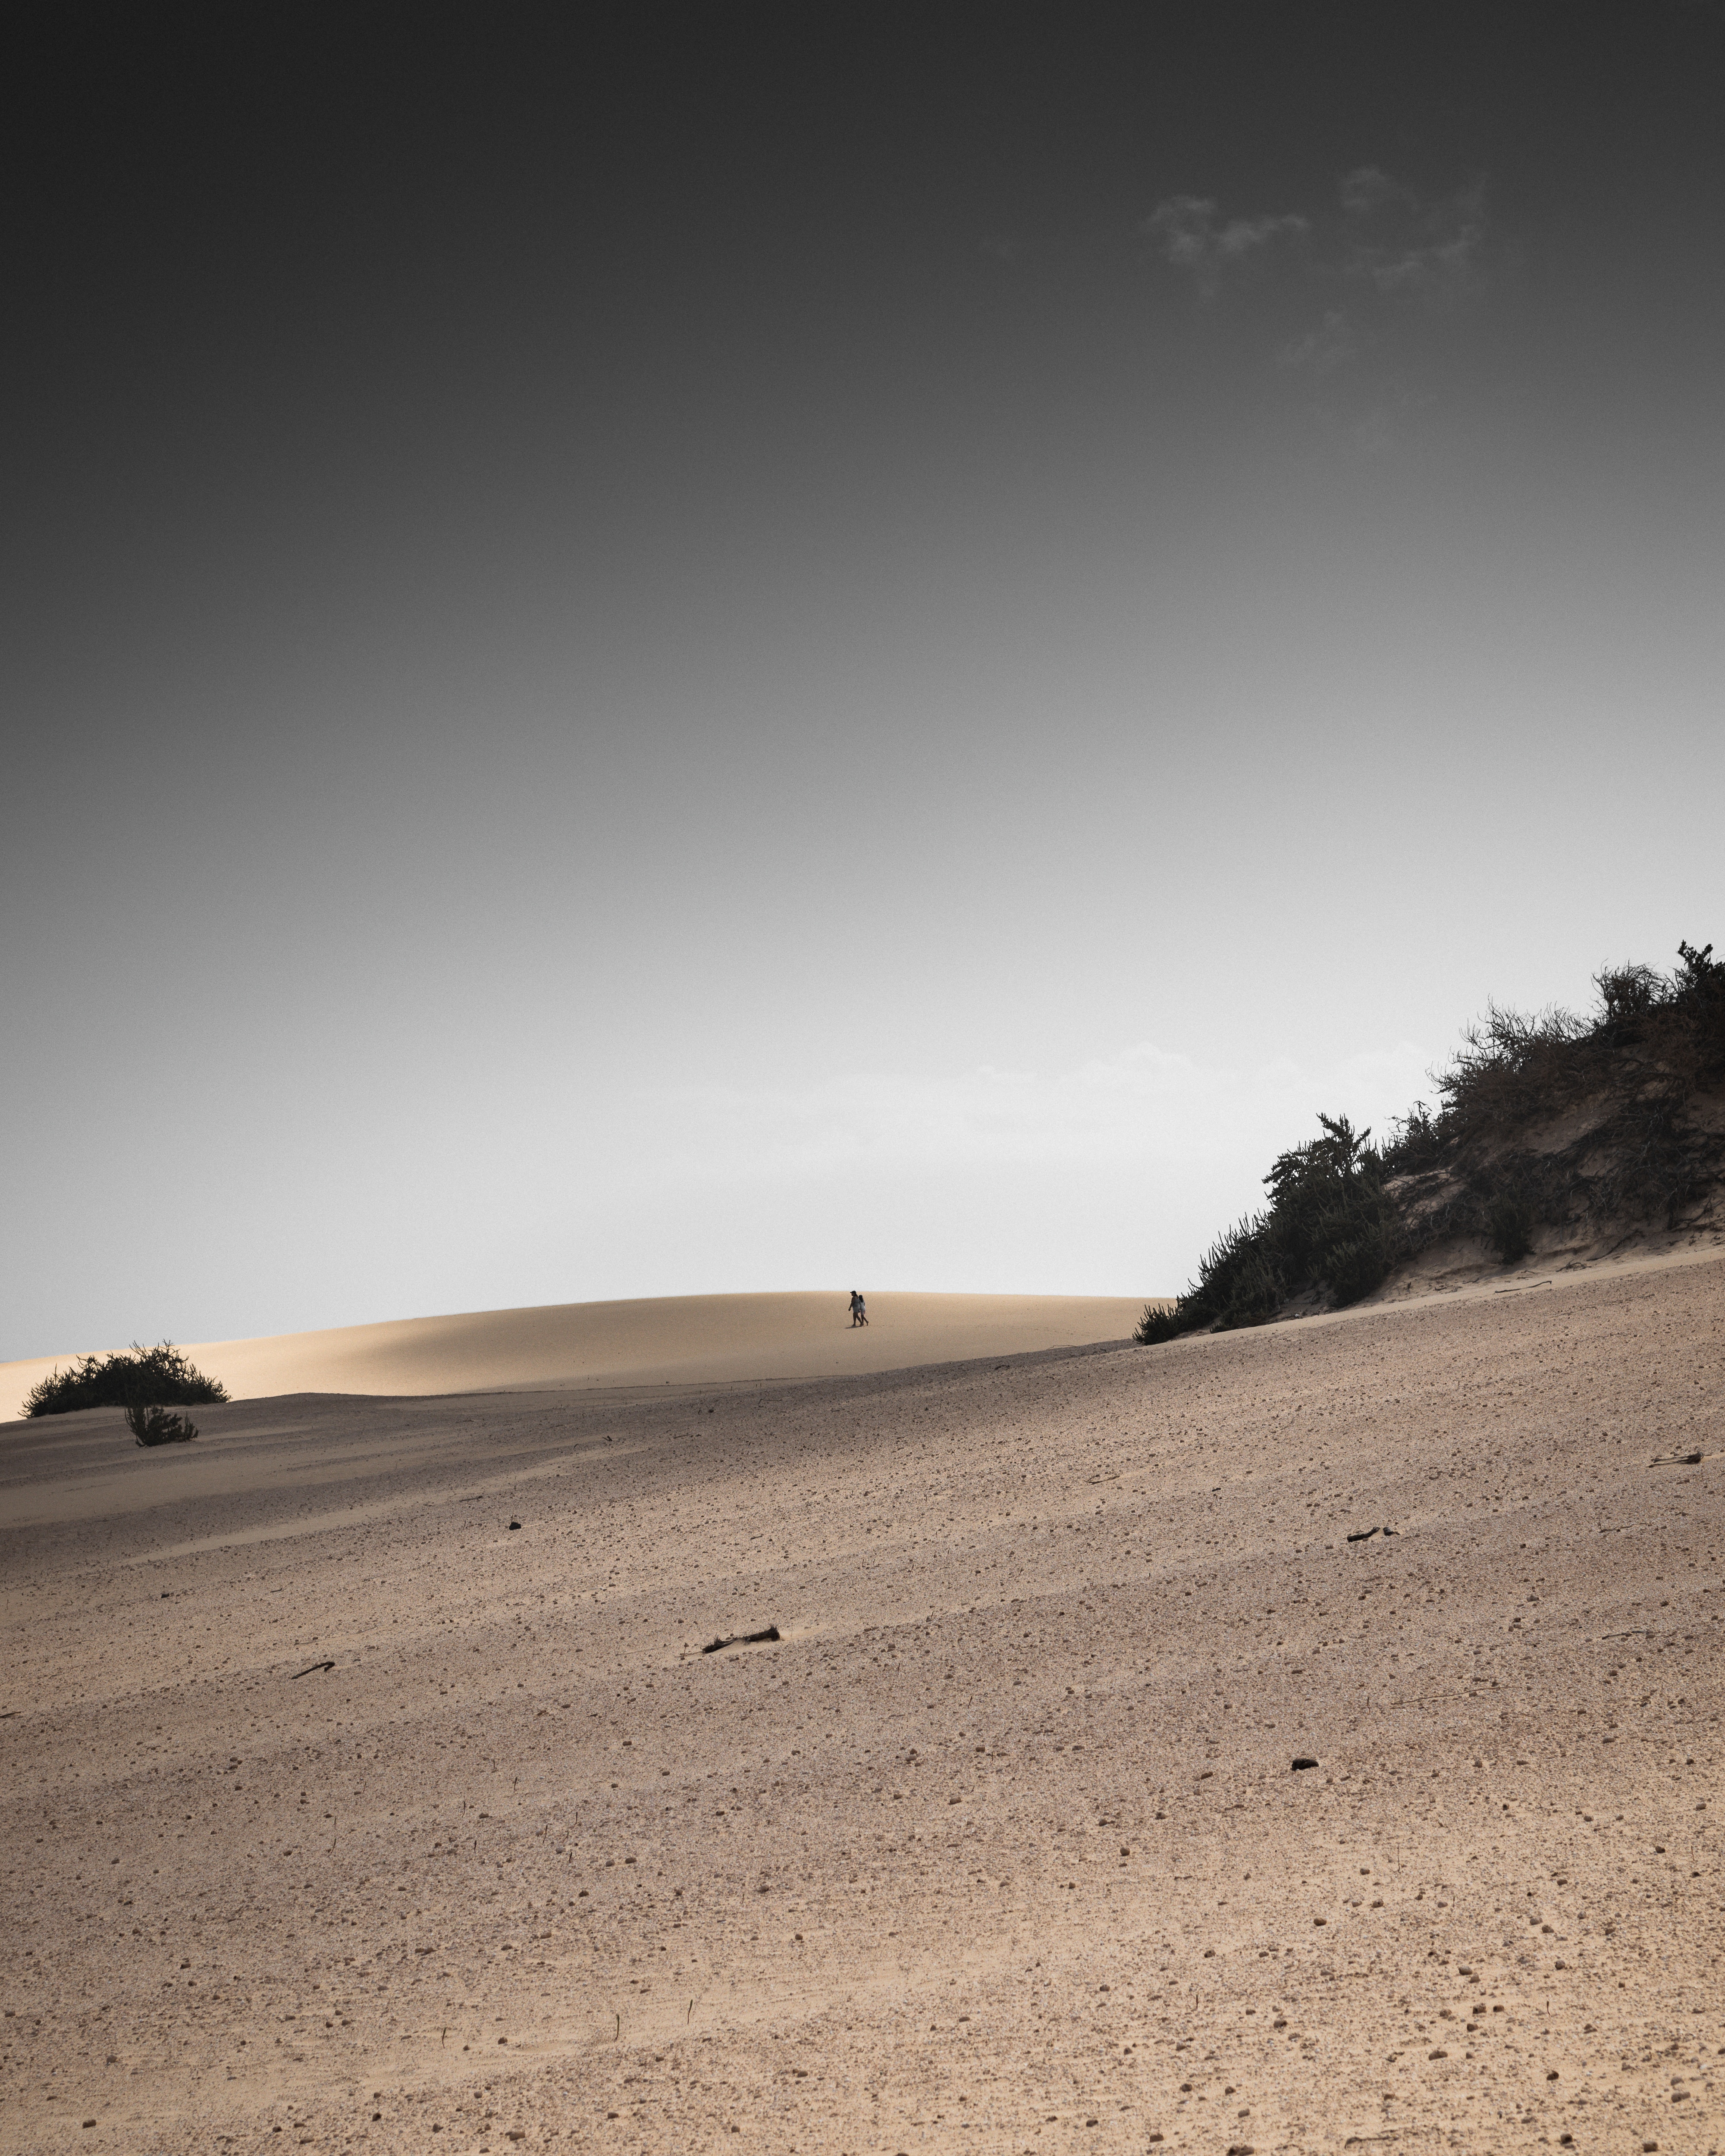 desert, landscape, nature, sand, silhouettes, hilly UHD